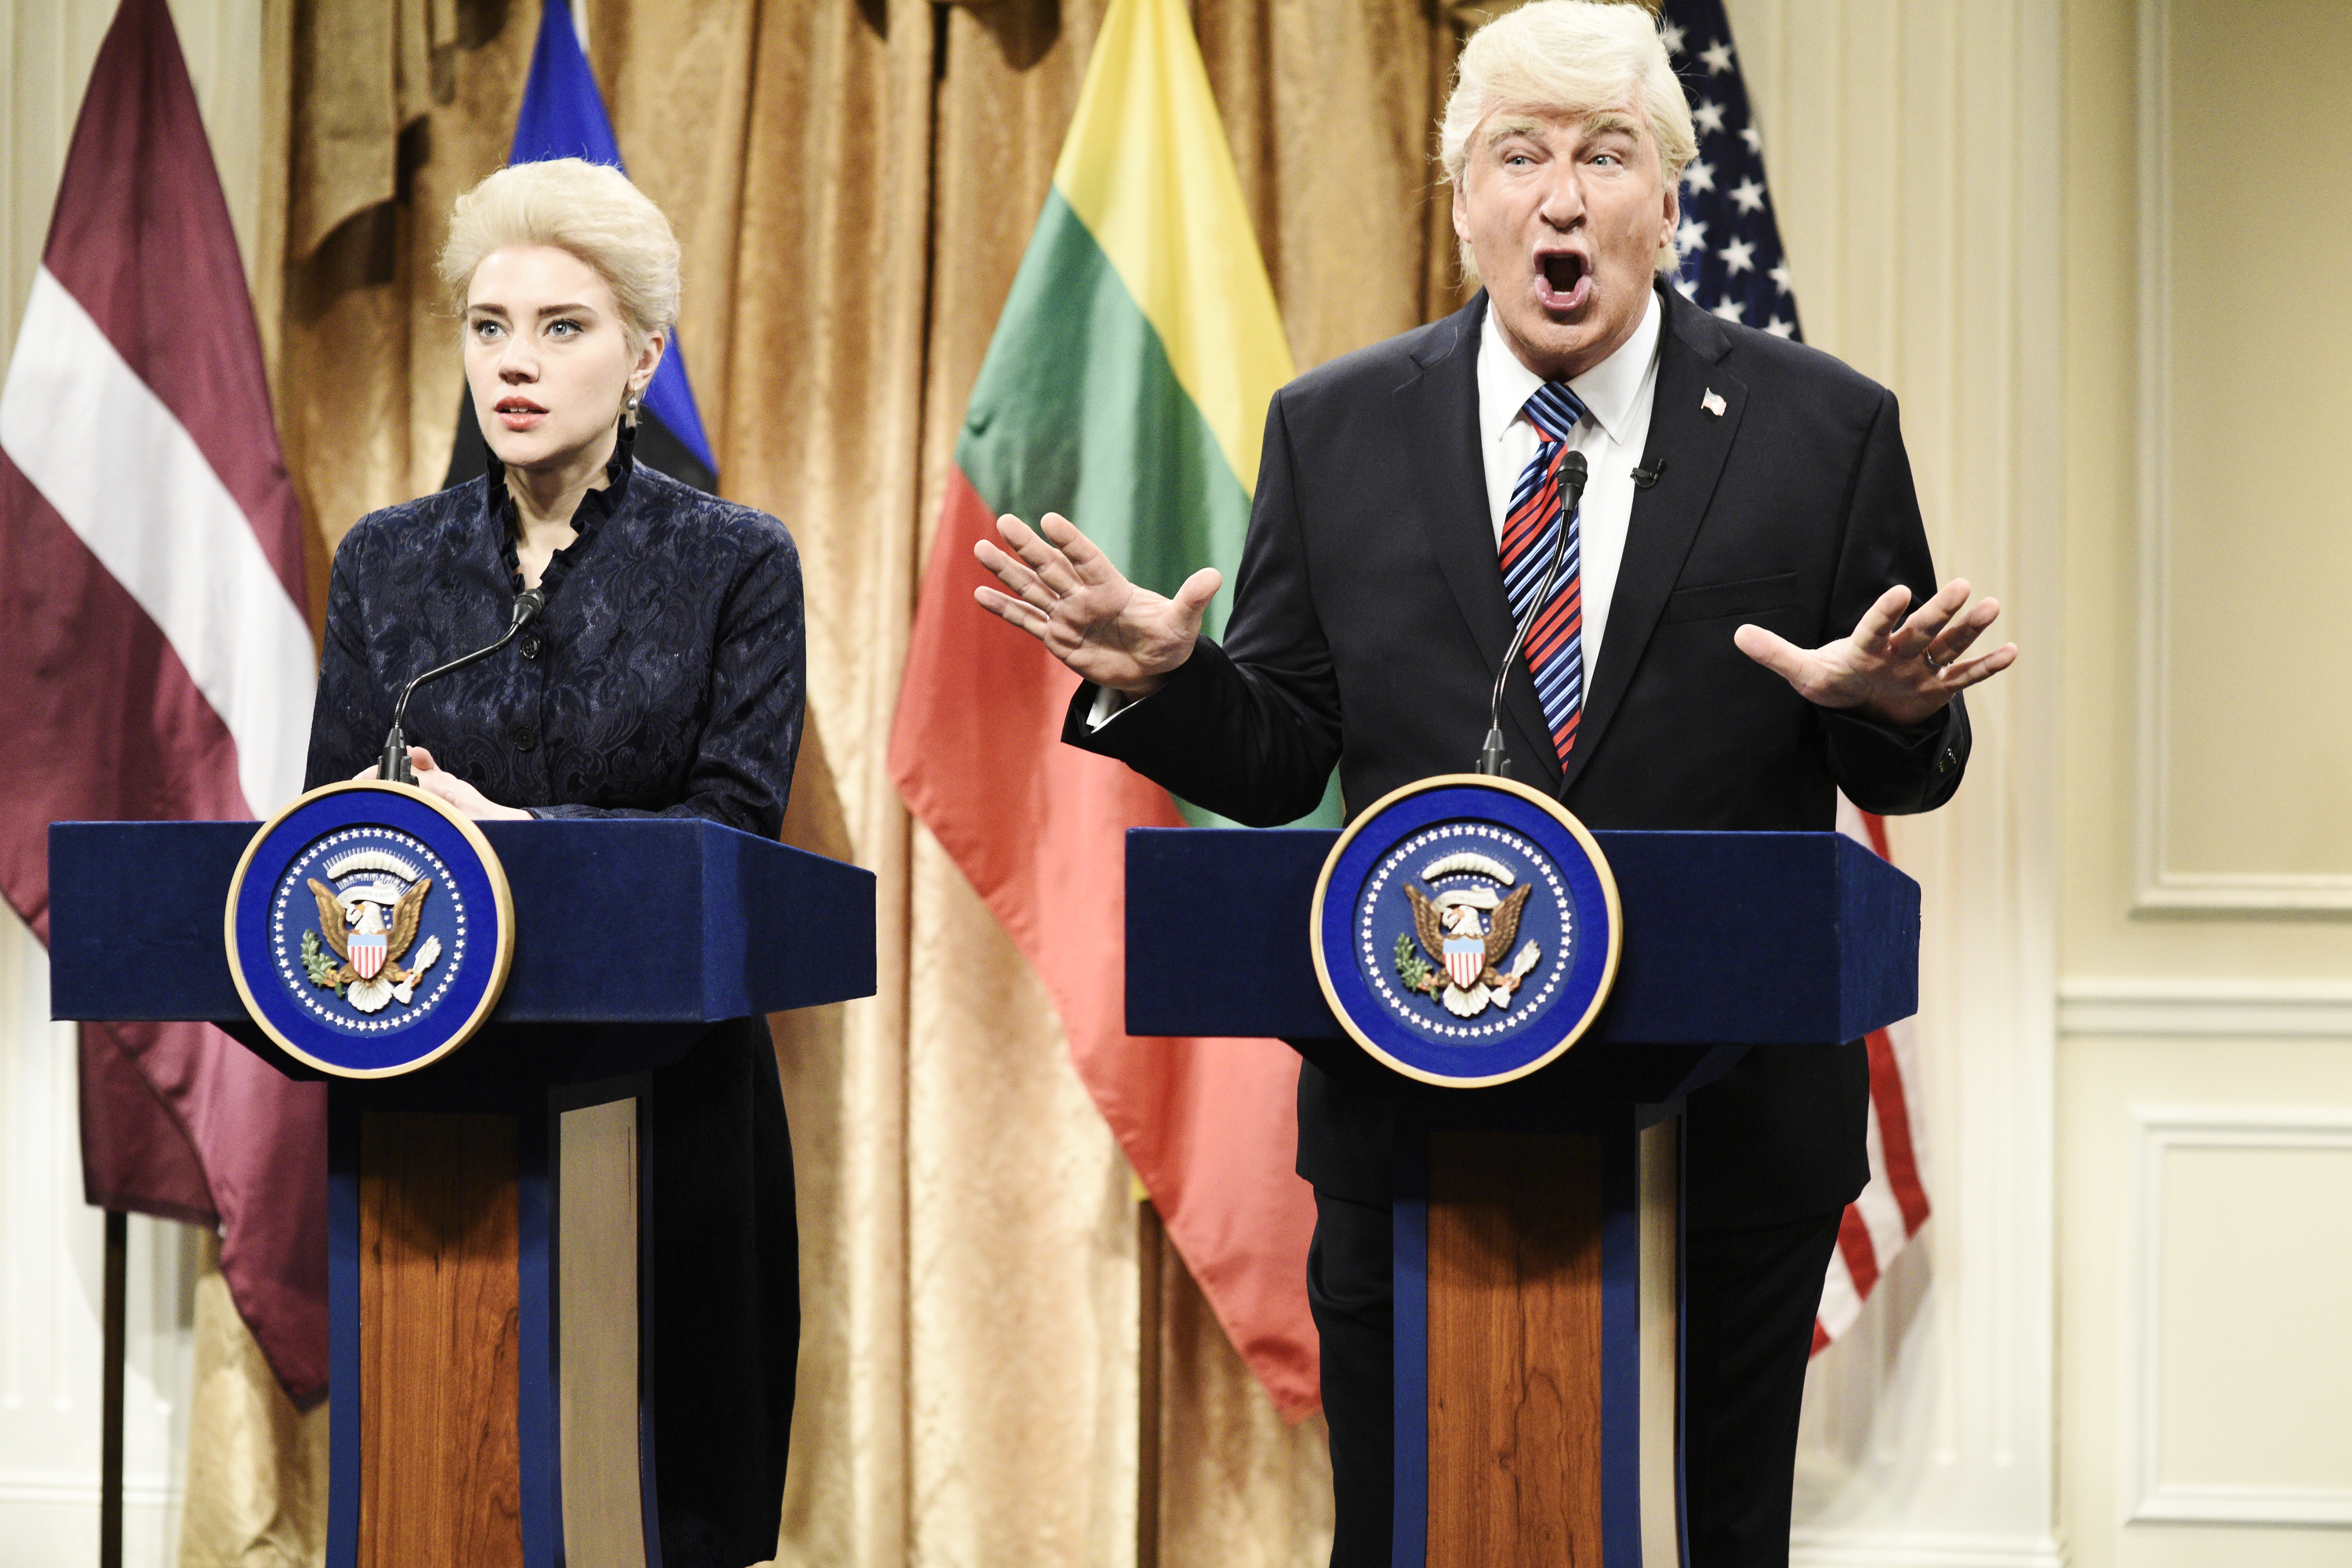 Pictured: (l-r) Kate McKinnon as Dalia Grybauskait, President of Lithuania, Alec Baldwin as President Donald Trump during 'Trump Baltic States Cold Open' in Studio 8H on Saturday, April 7, 2018. (Will Heath - NBC/NBCU Photo Bank/Getty Images)